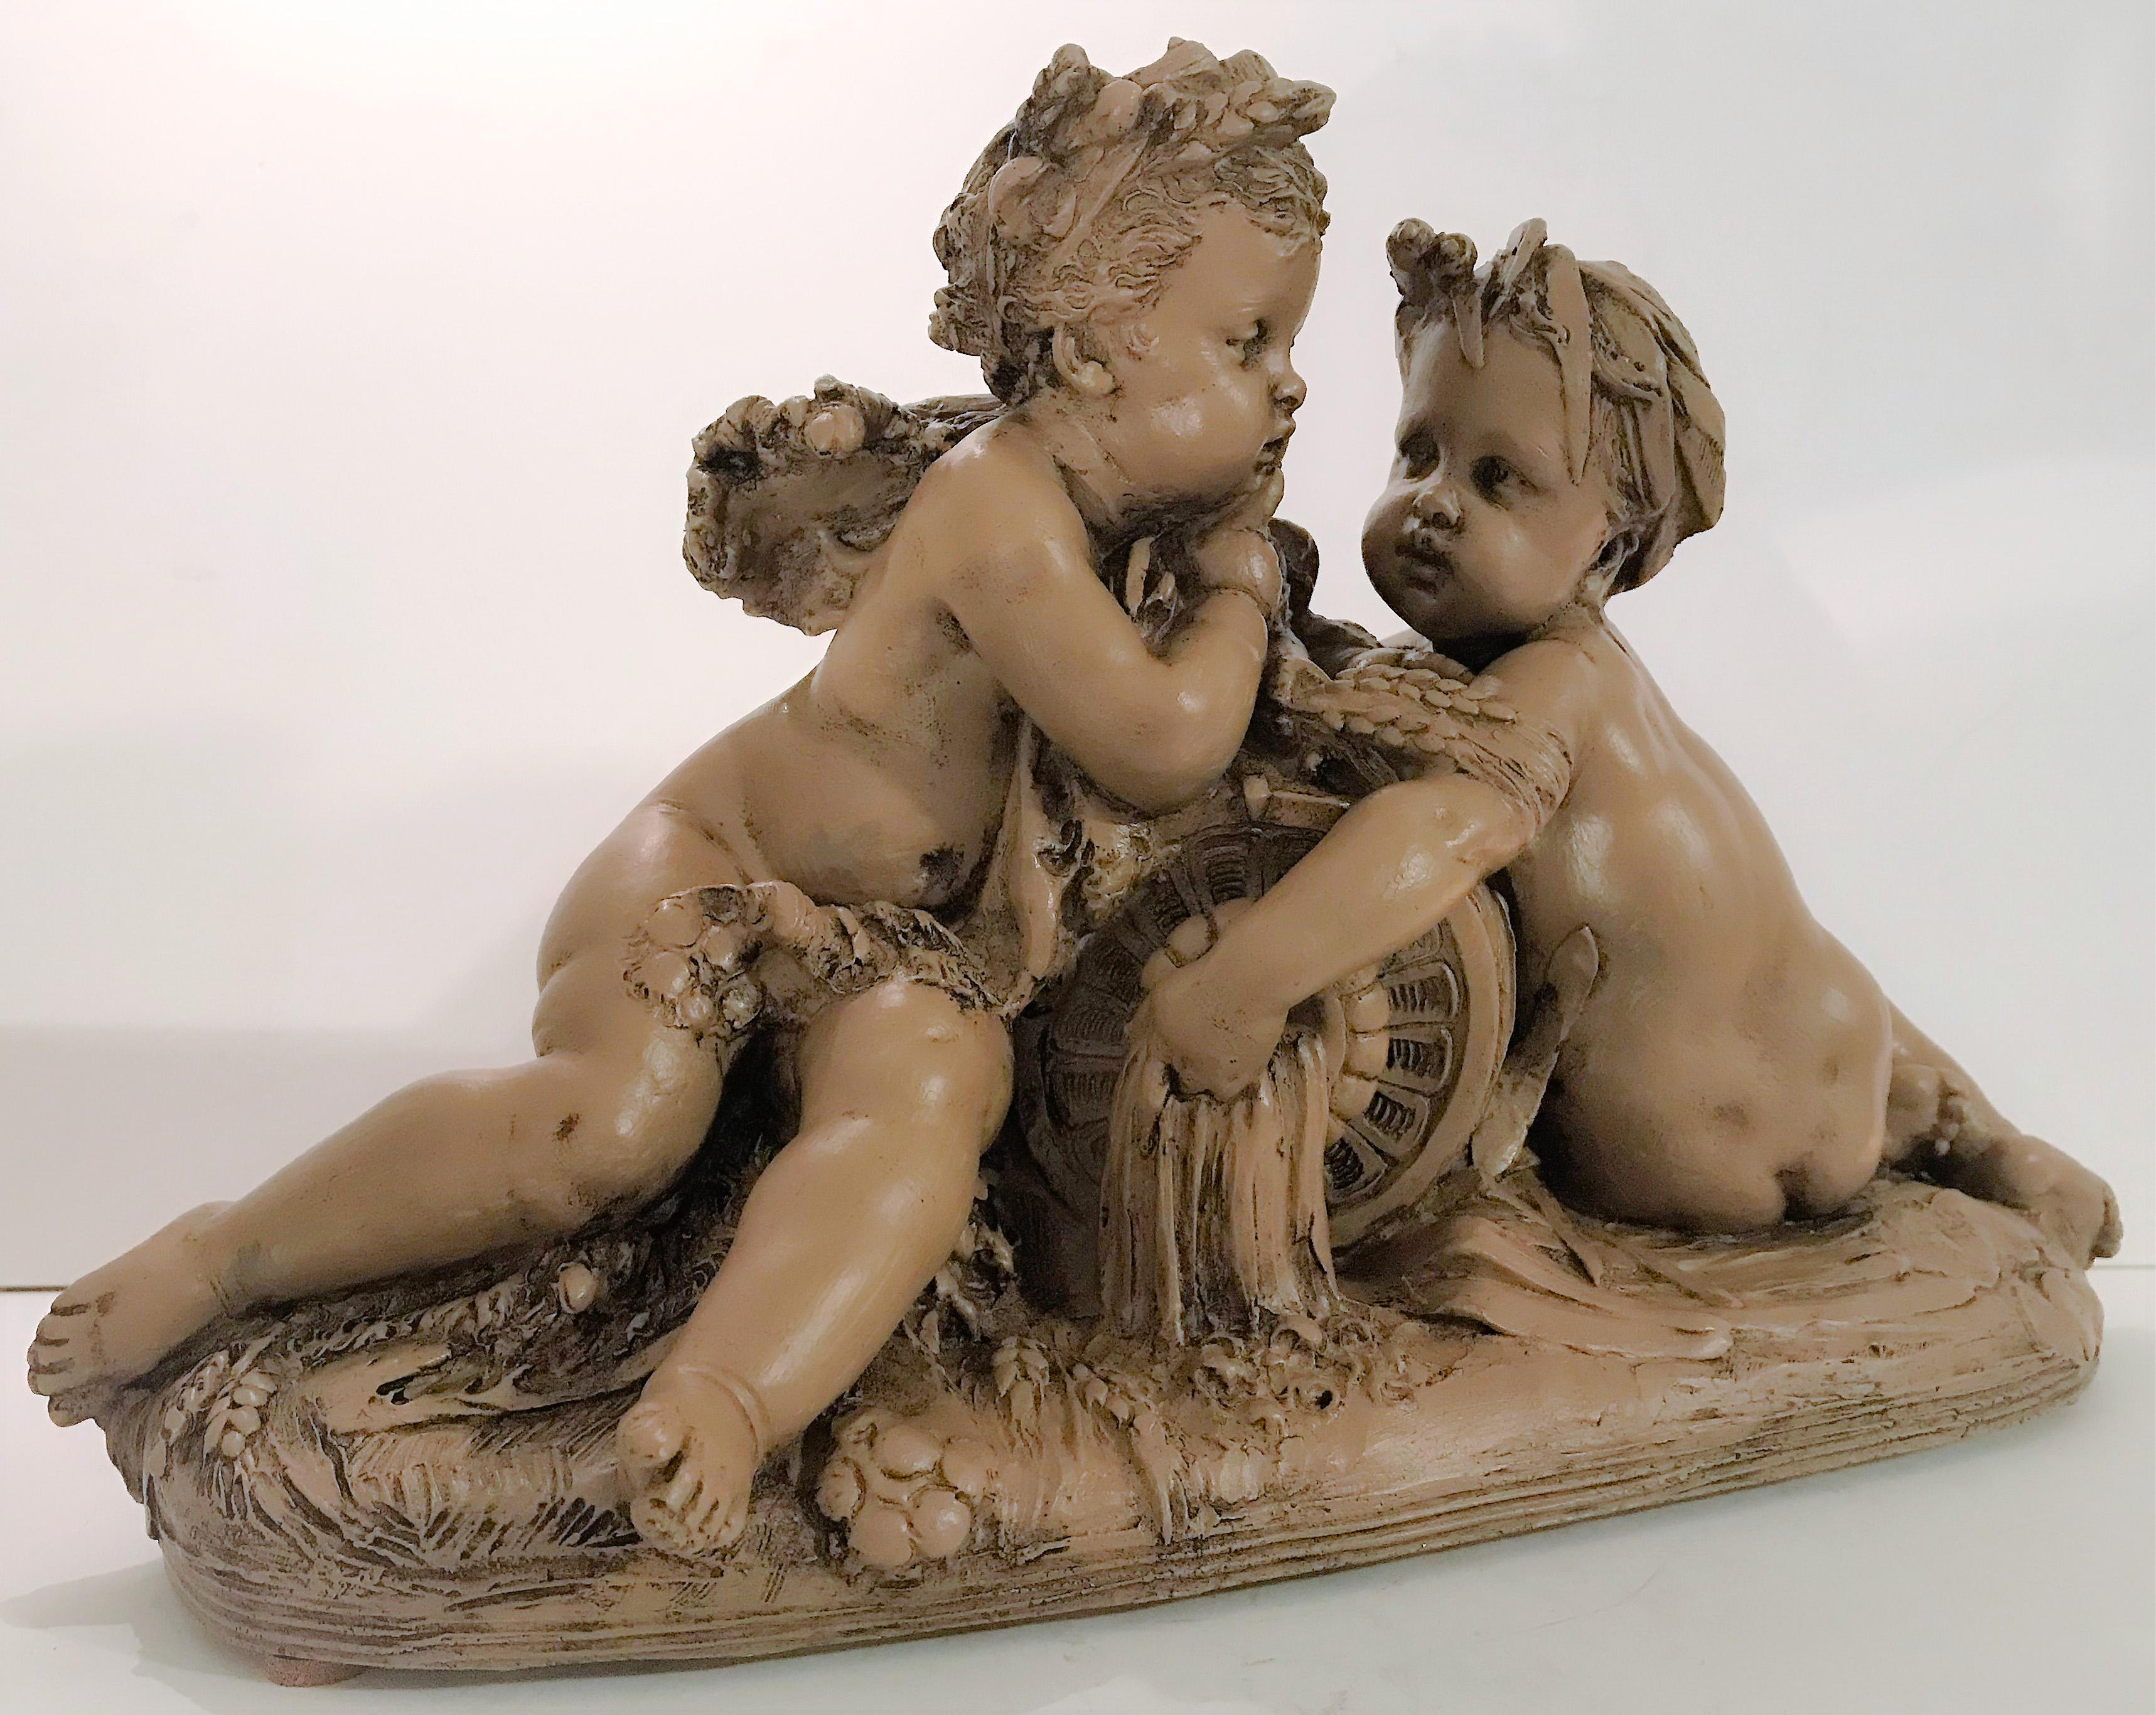 This 19th century terracotta sculpture of two putti is by Albert - Ernest Carrier - Belleuse (1824 - 1887). The sculpture is known as the, “Allegorie de la Terre et l’Eau “(Allegory of Earth and Water). The terracotta is signed 